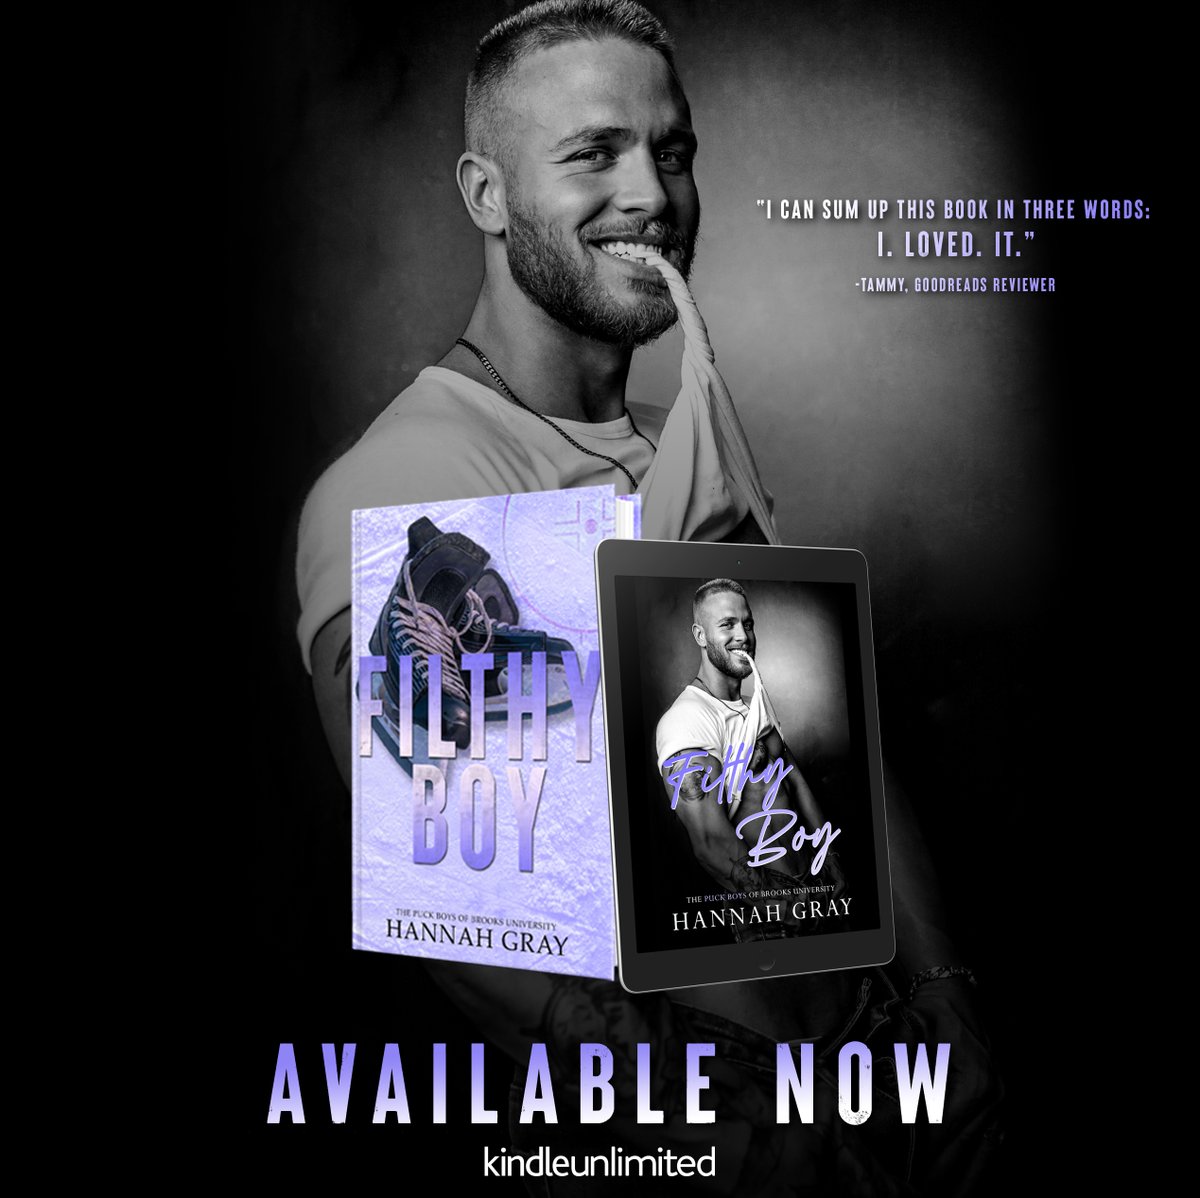 FILTHY BOY by Hannah Gray is NOW AVAILABLE!! Grab this friends with benefits, hockey romance with all the heat, laughs and feels today! mybook.to/filthyboy
#NewRelease #HannahGray #FilthyBoy #RomanceReaders #wordsmithpublicity #bookblogger #writingcommunity #bloggingcommunity